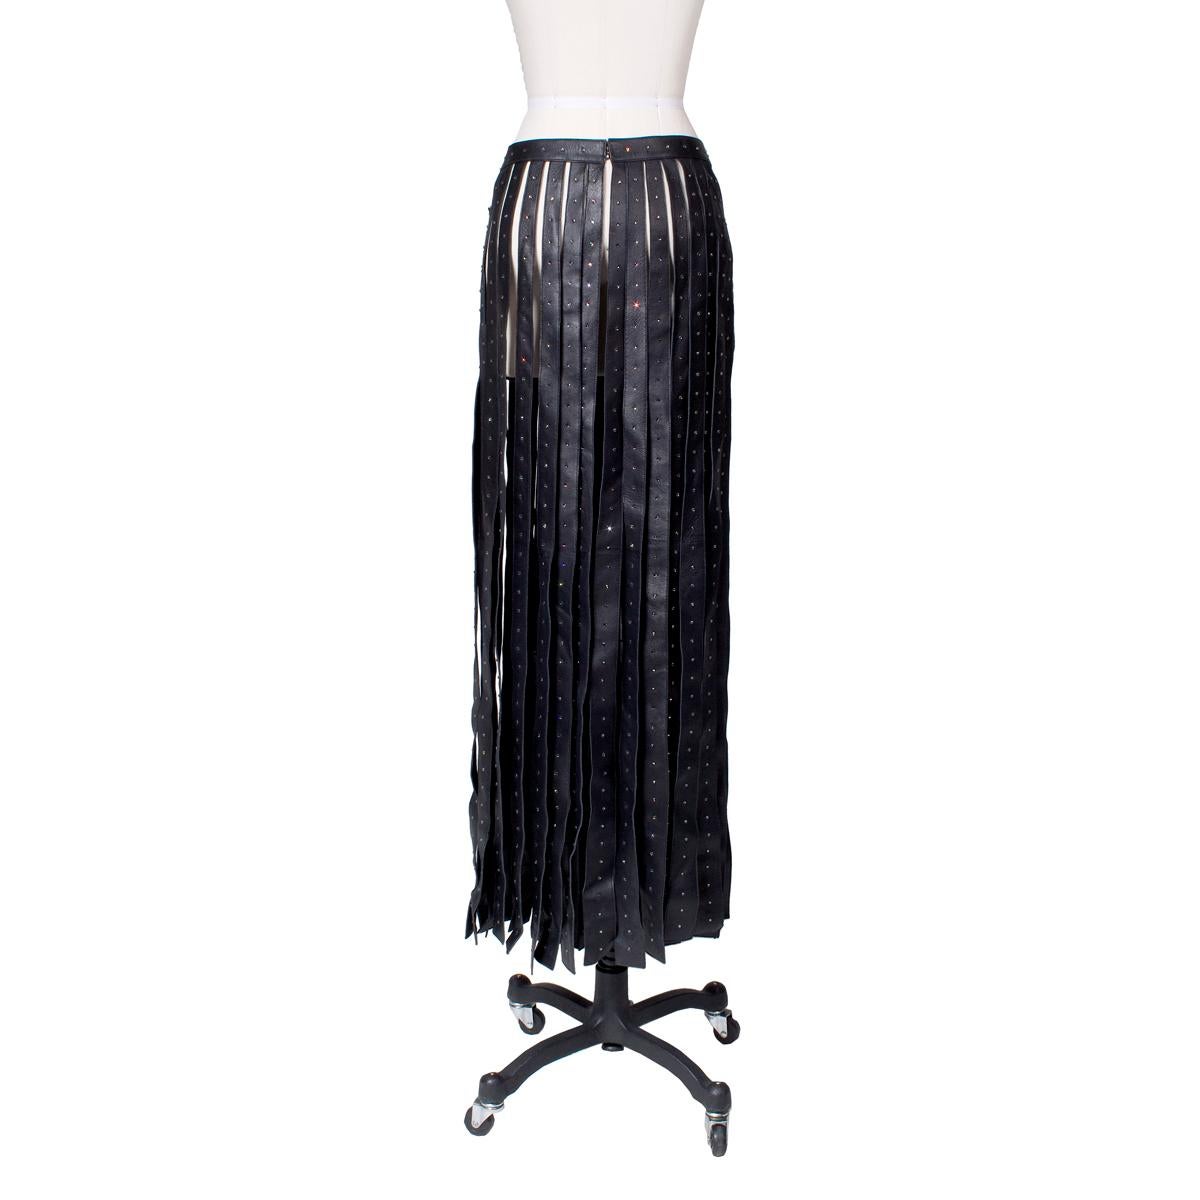 Product Details:
Skirt from Valentino circa 2016
Long fringe strips of black leather with rhinestones
Hook closure on waistband
Condition: Excellent

Size/Measurements:
Labelled size 10 US
34